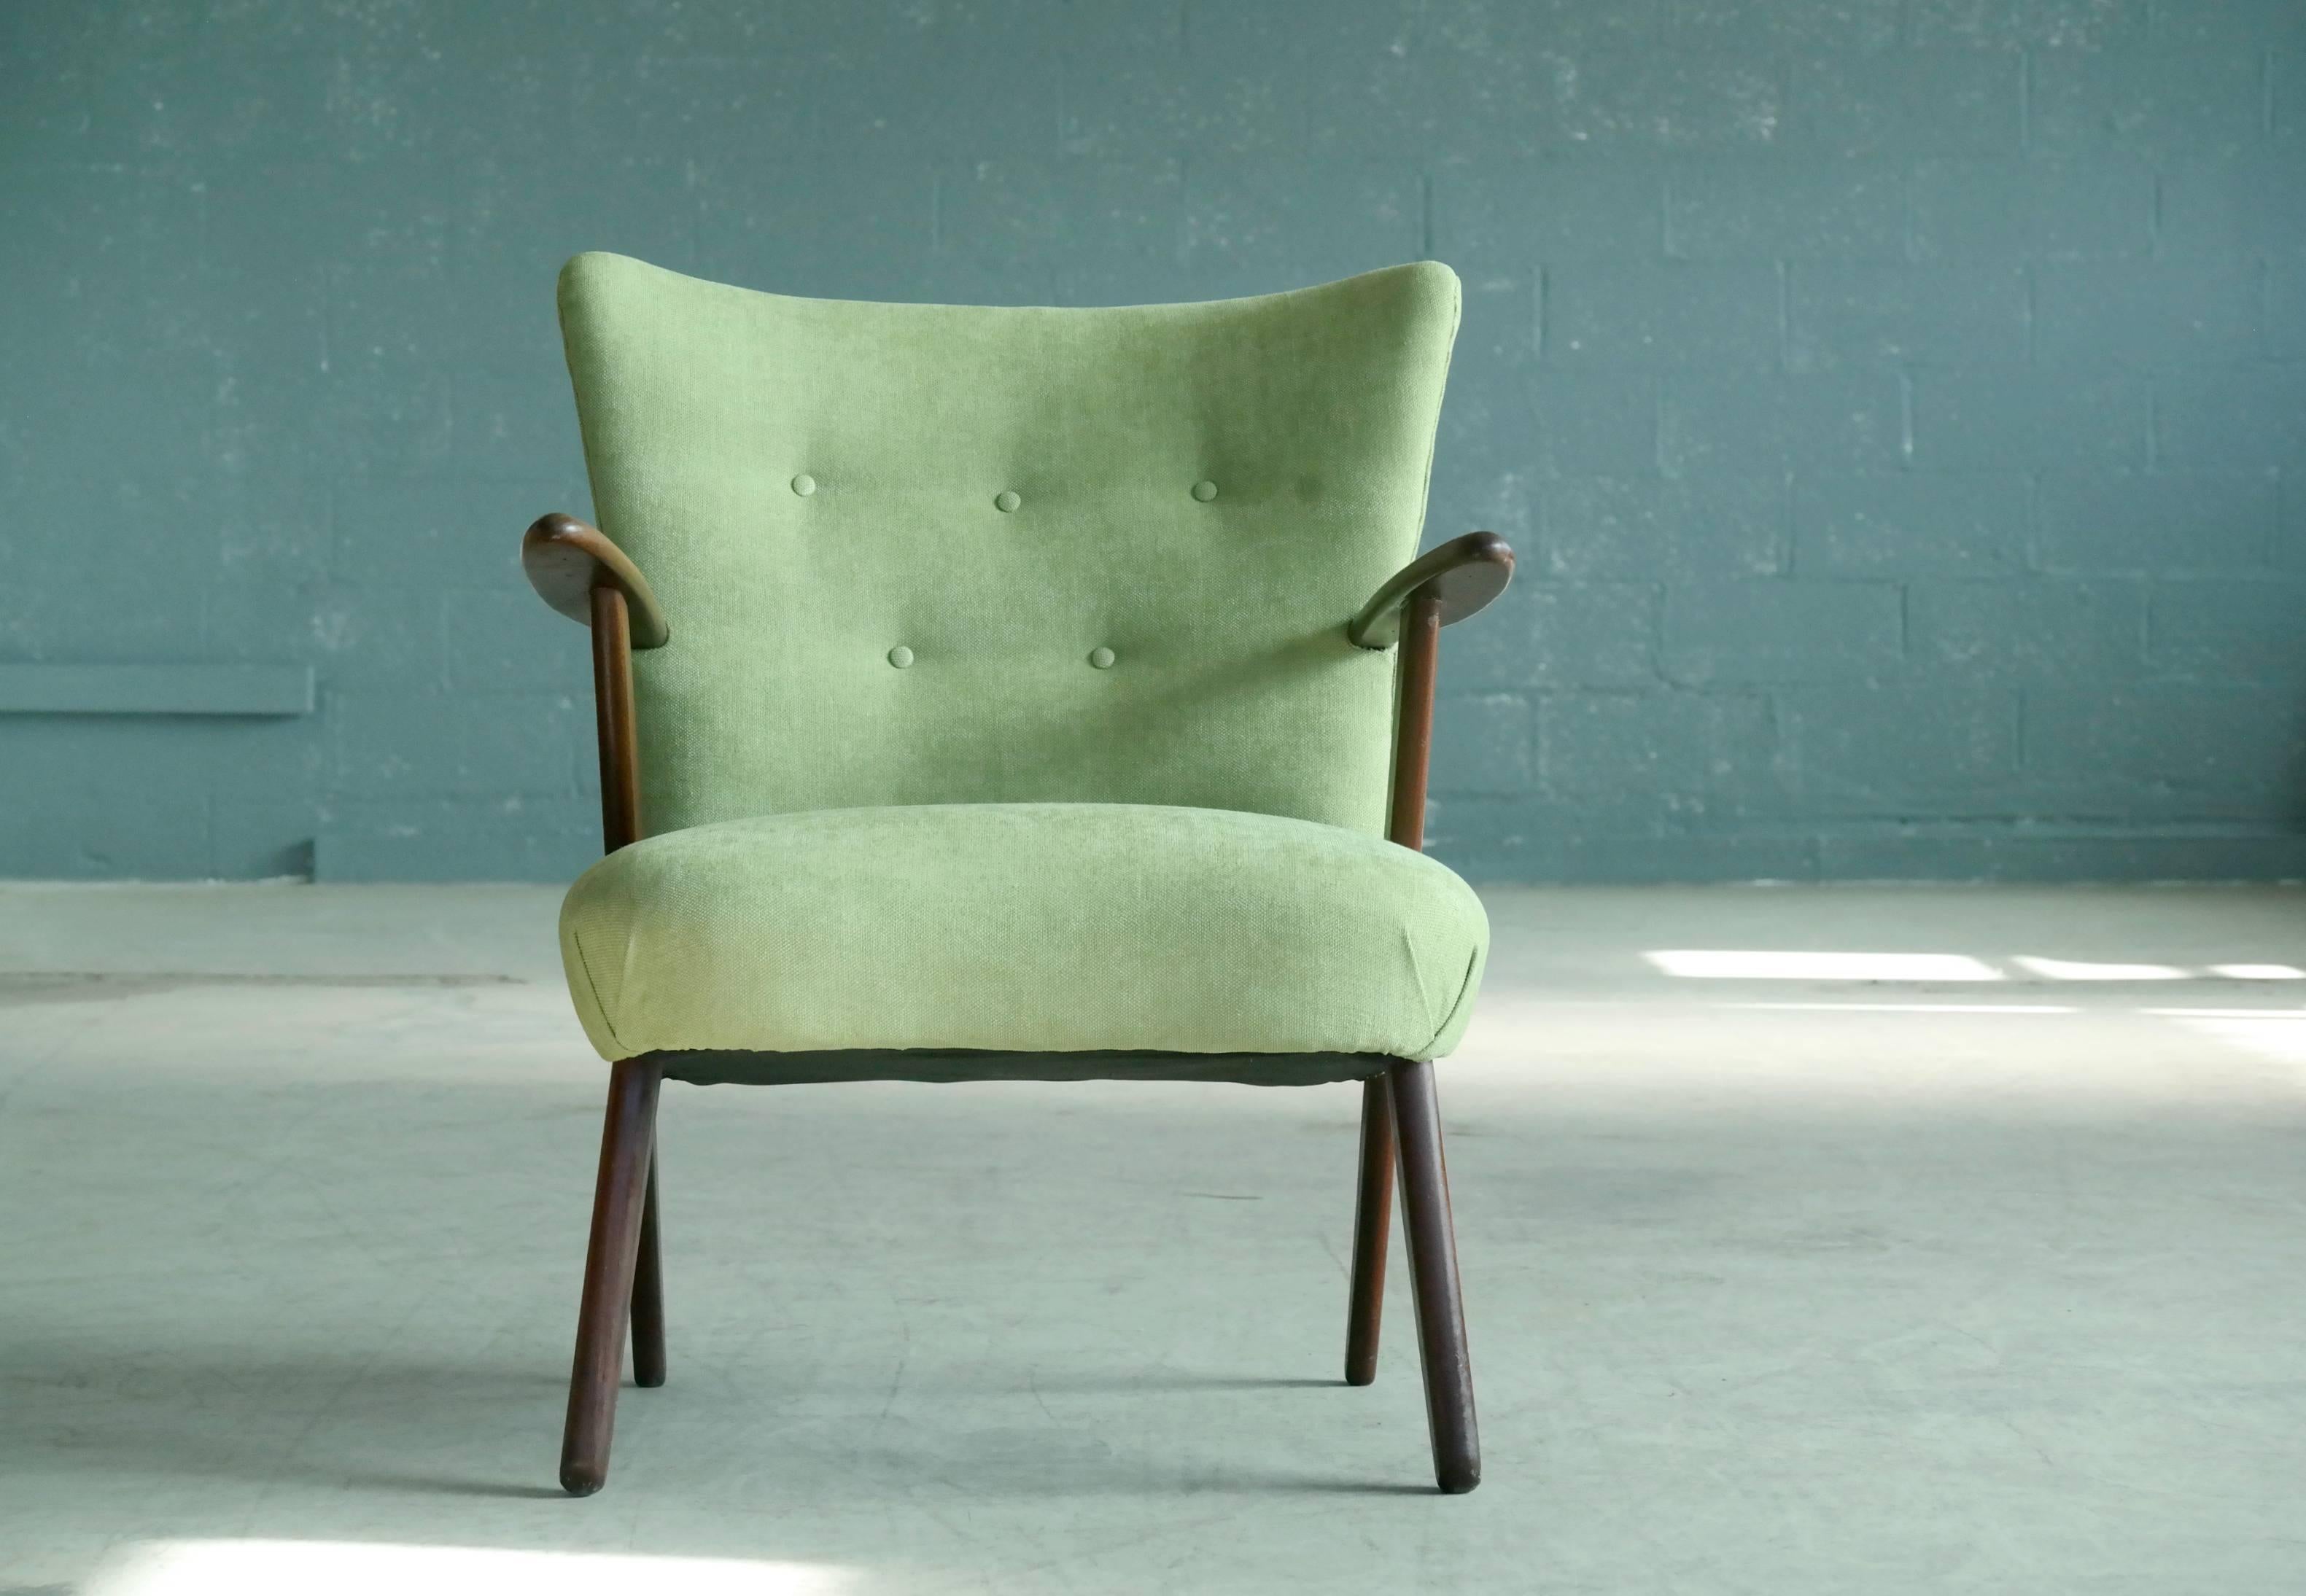 A very cool Danish lounge or cocktail chair from the 1950s in the style of Kurt Olsen. Beautiful wood grain and well crafted sturdy construction yet comfortable and light weight. Newly upholstered in a fresh lime green color, great accent chair for